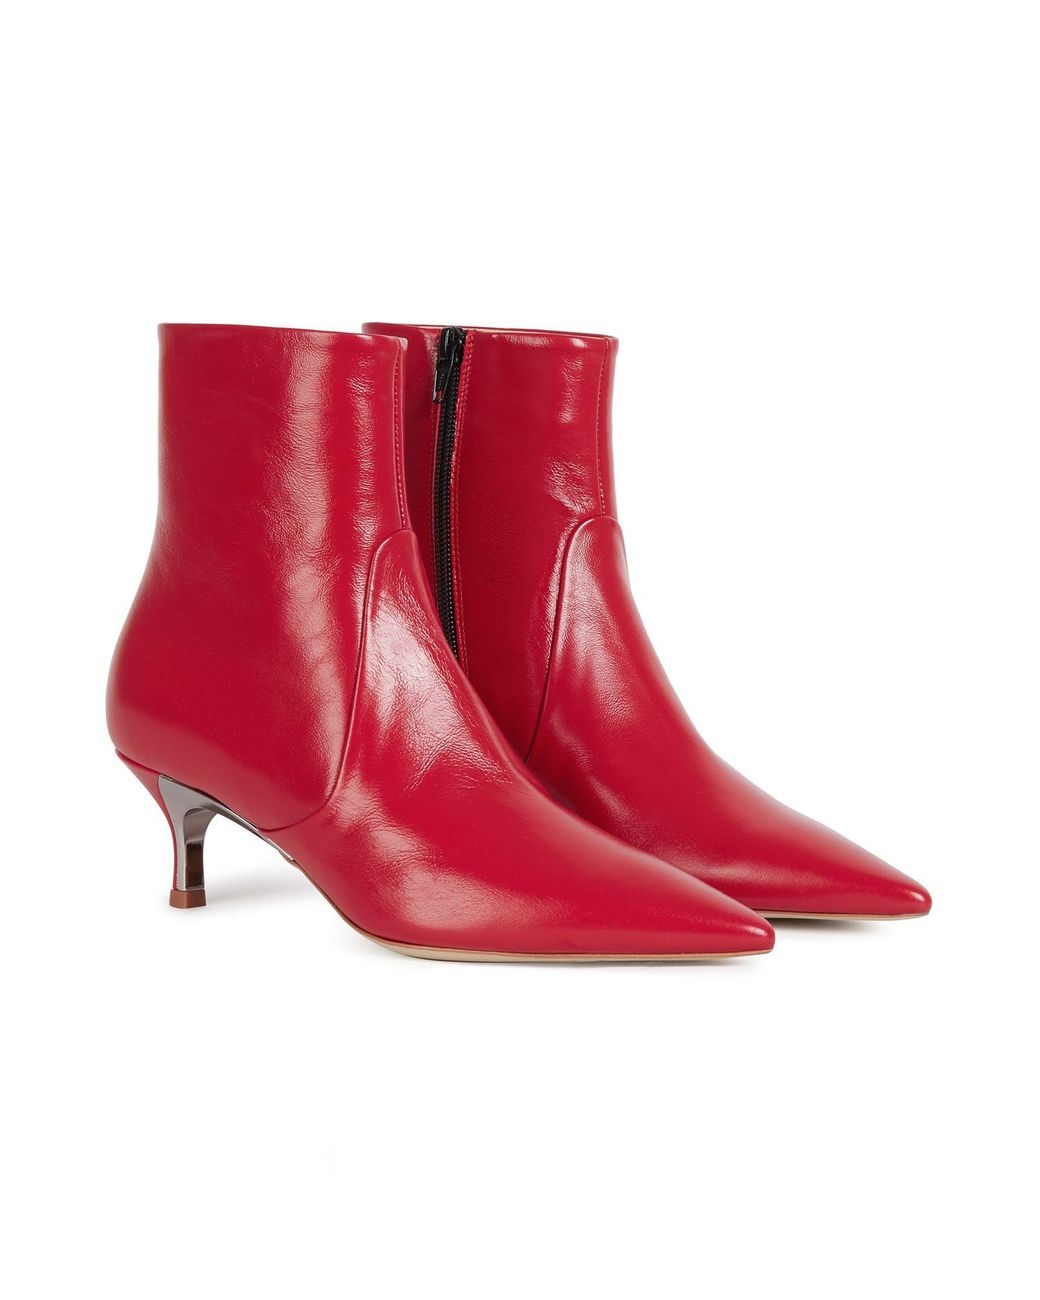 Furla Leather Ankle Boots in Red - Lyst